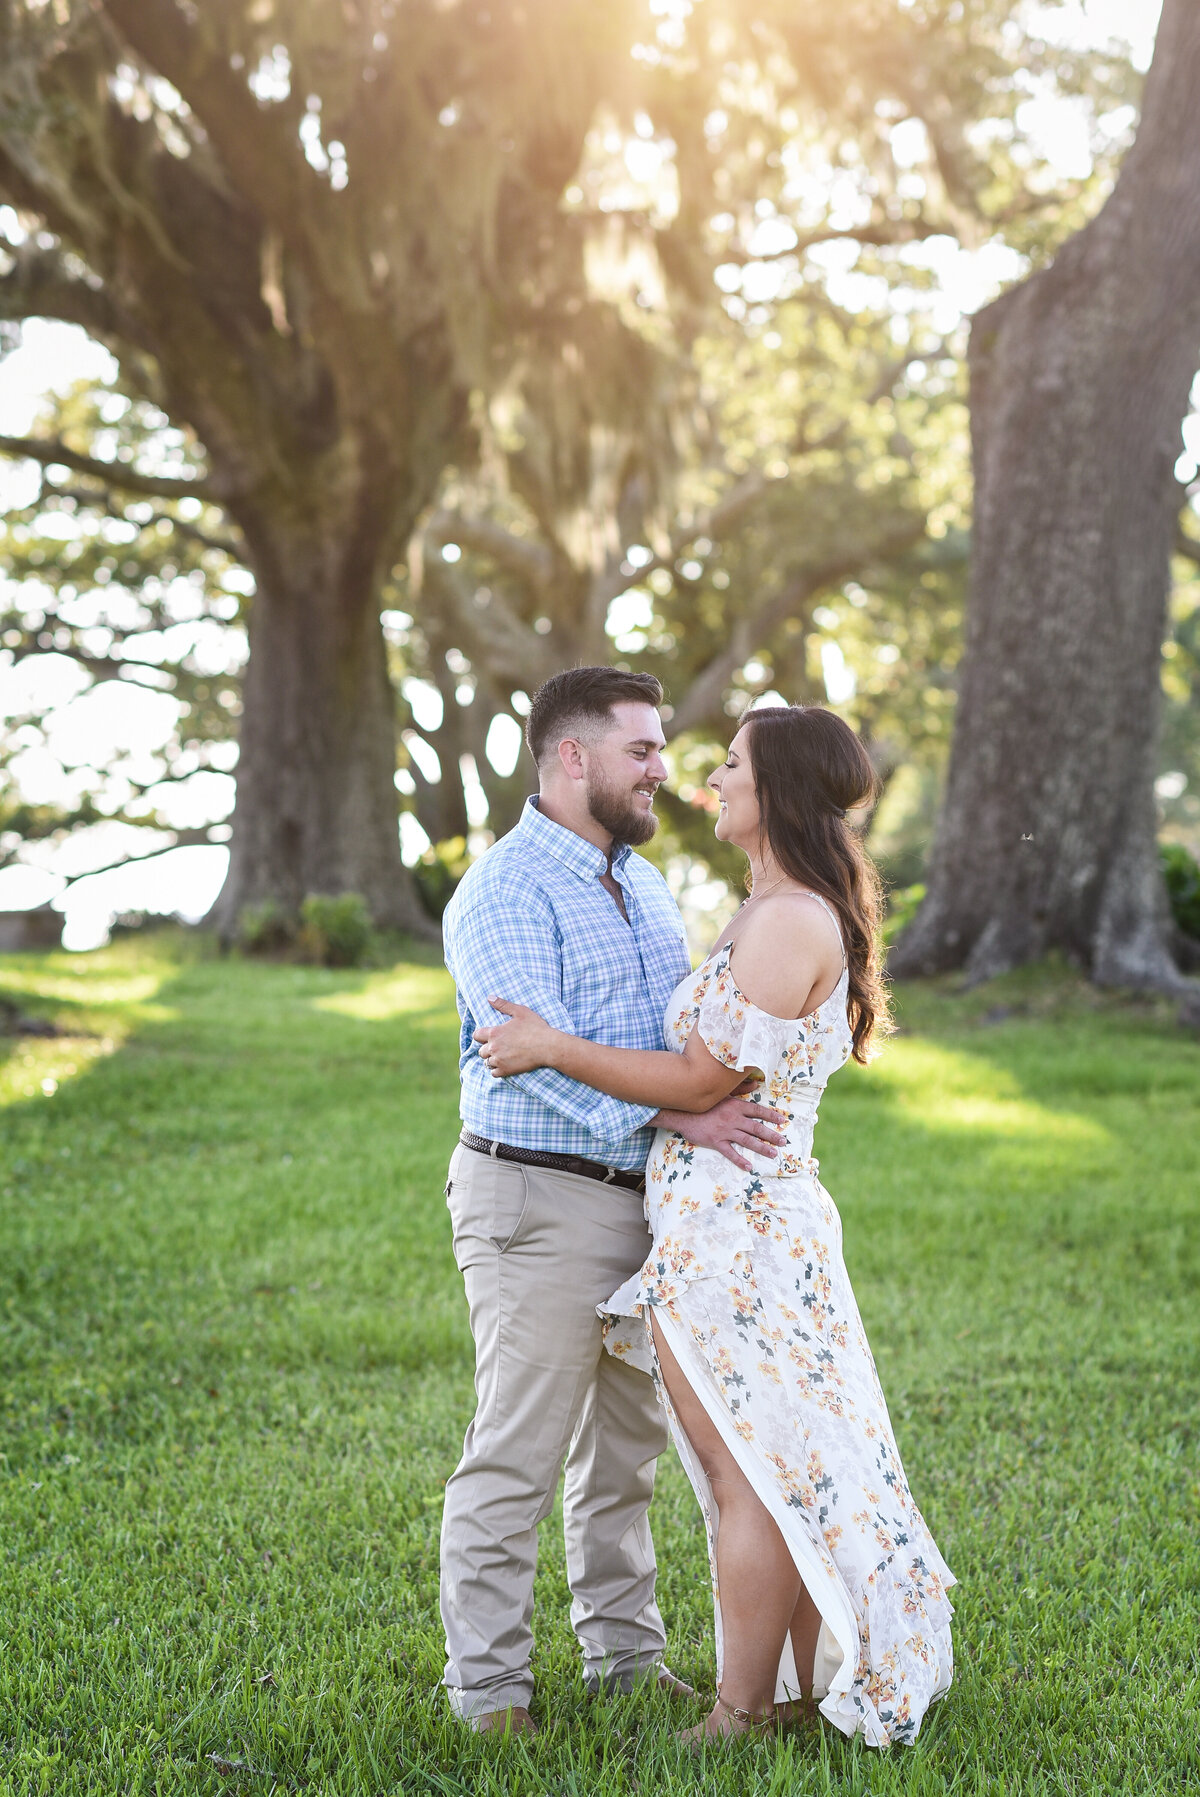 Beautiful Mississippi Engagement Photography: couple embraces at sunset under oaks with Spanish Moss in Ocean Springs, MS